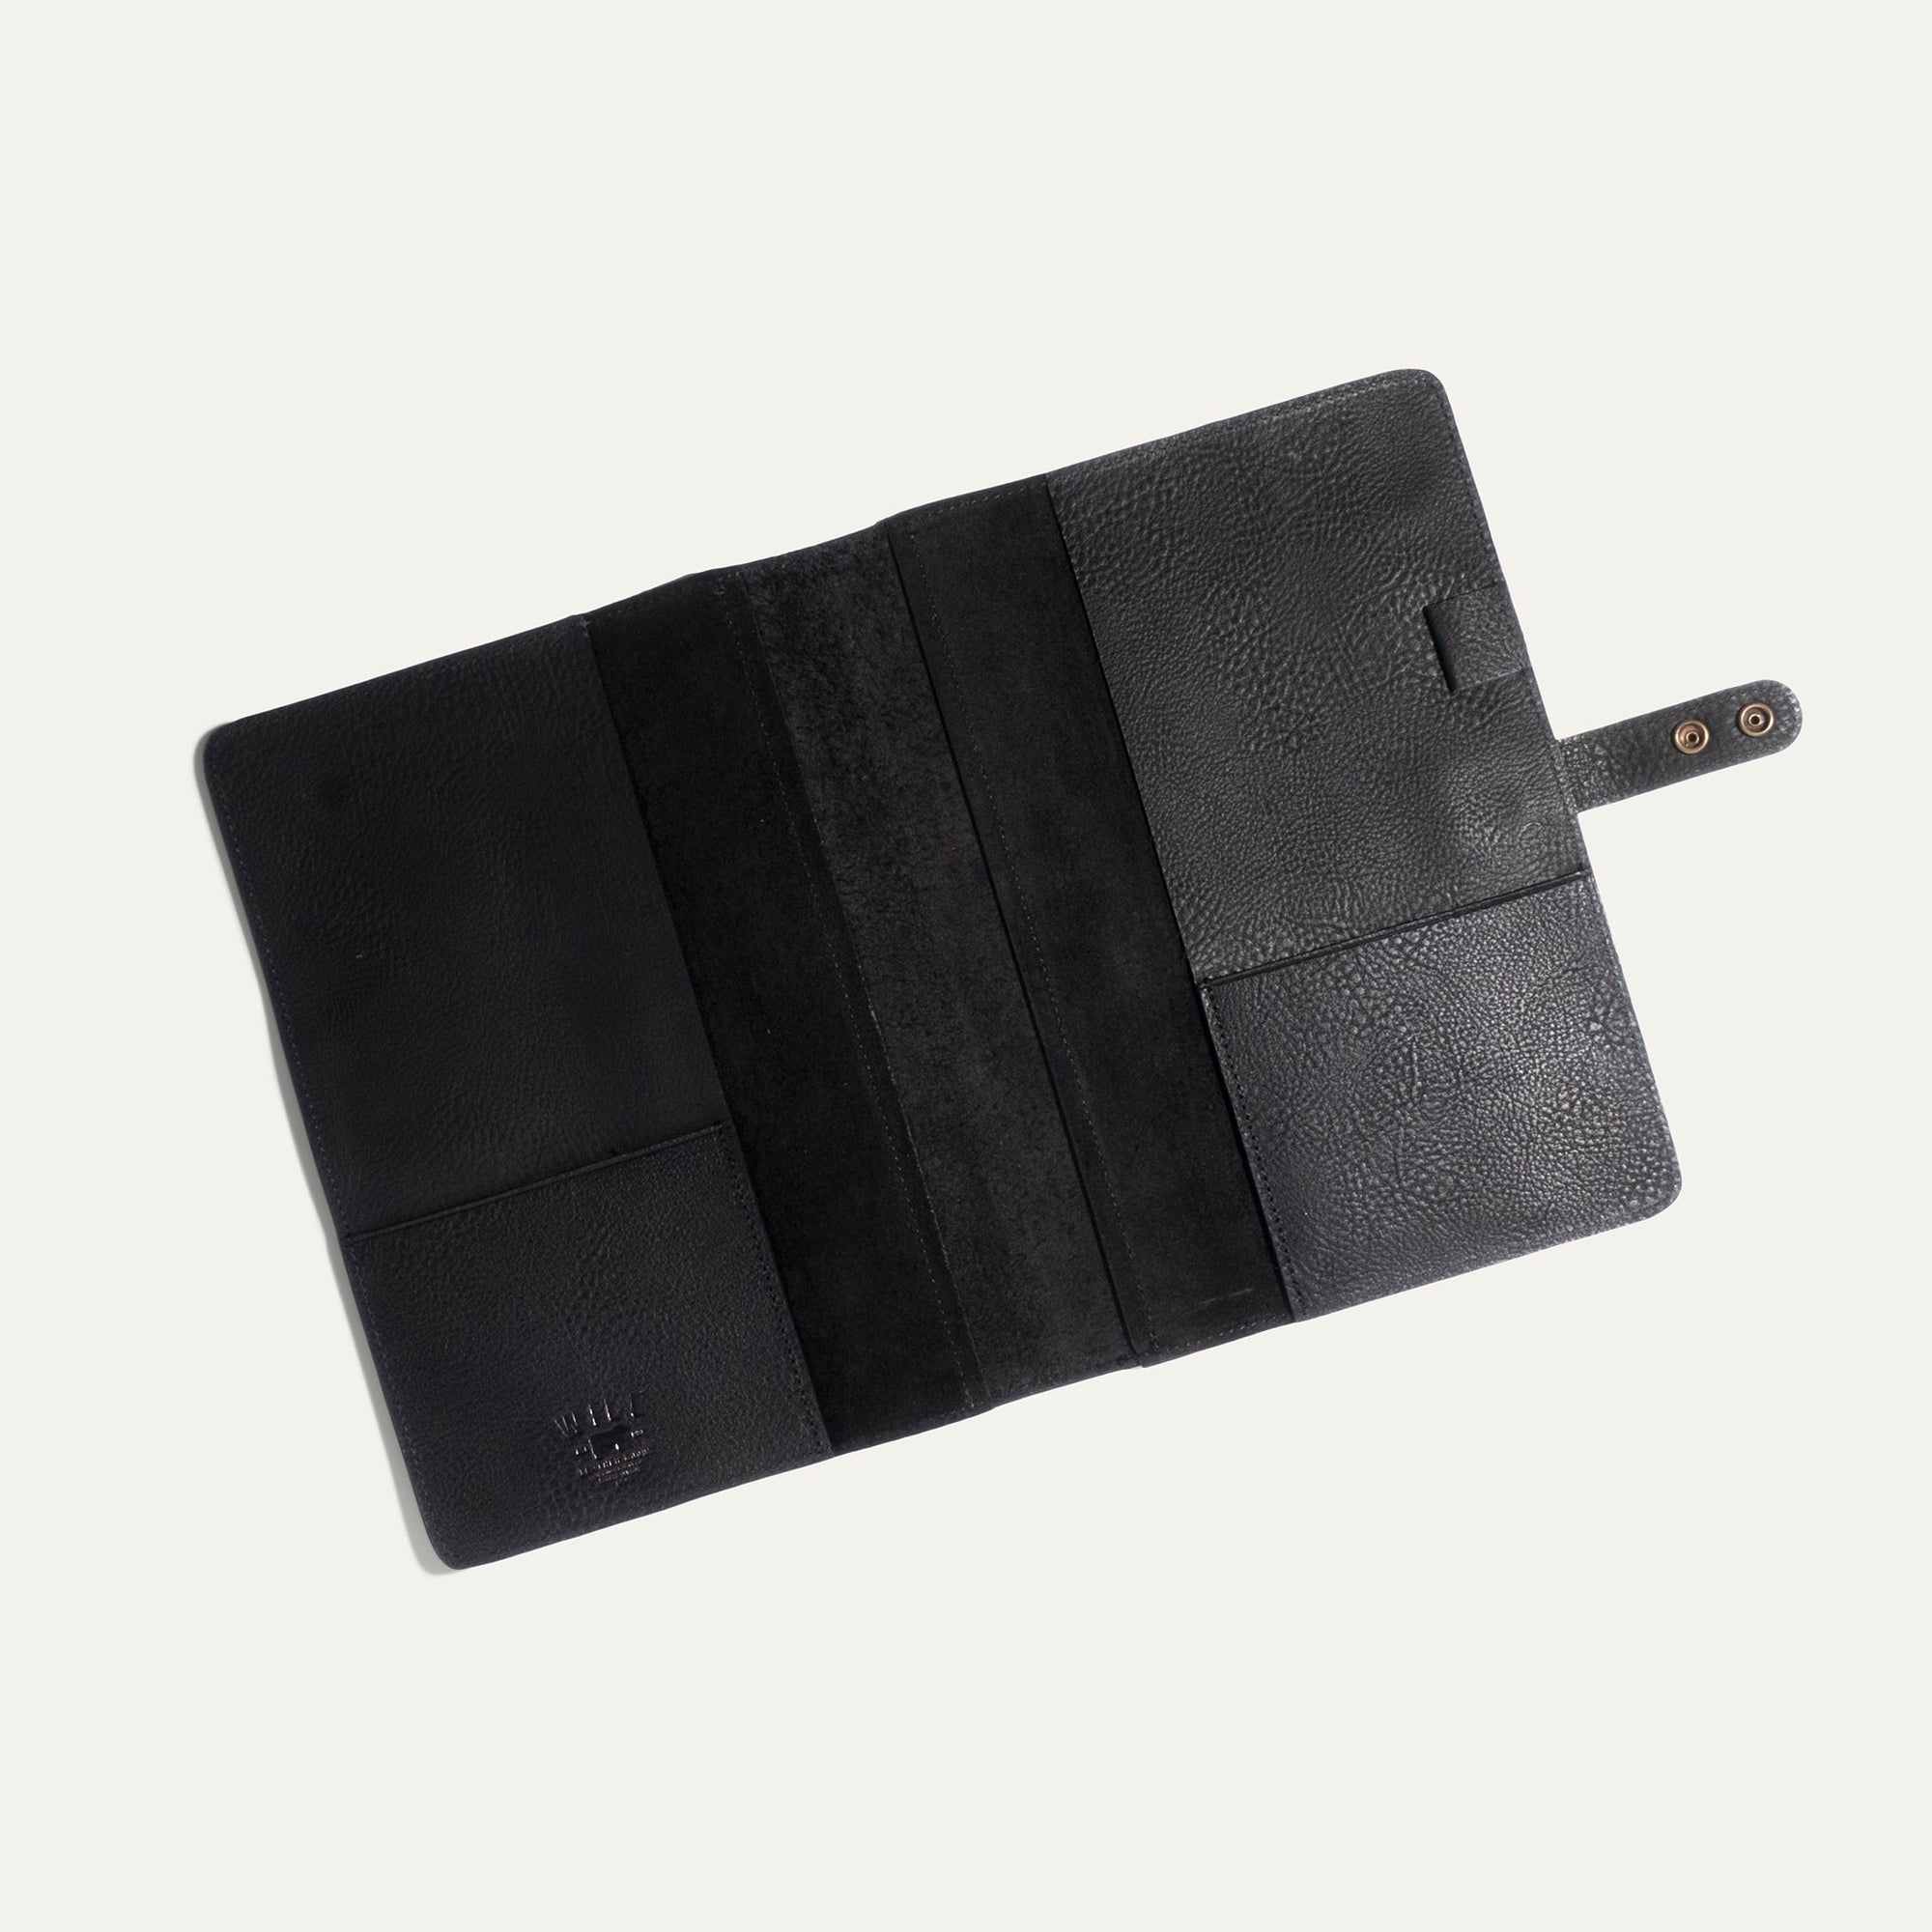 Large Signature Leather Journal Cover in Black by Will Leather Goods